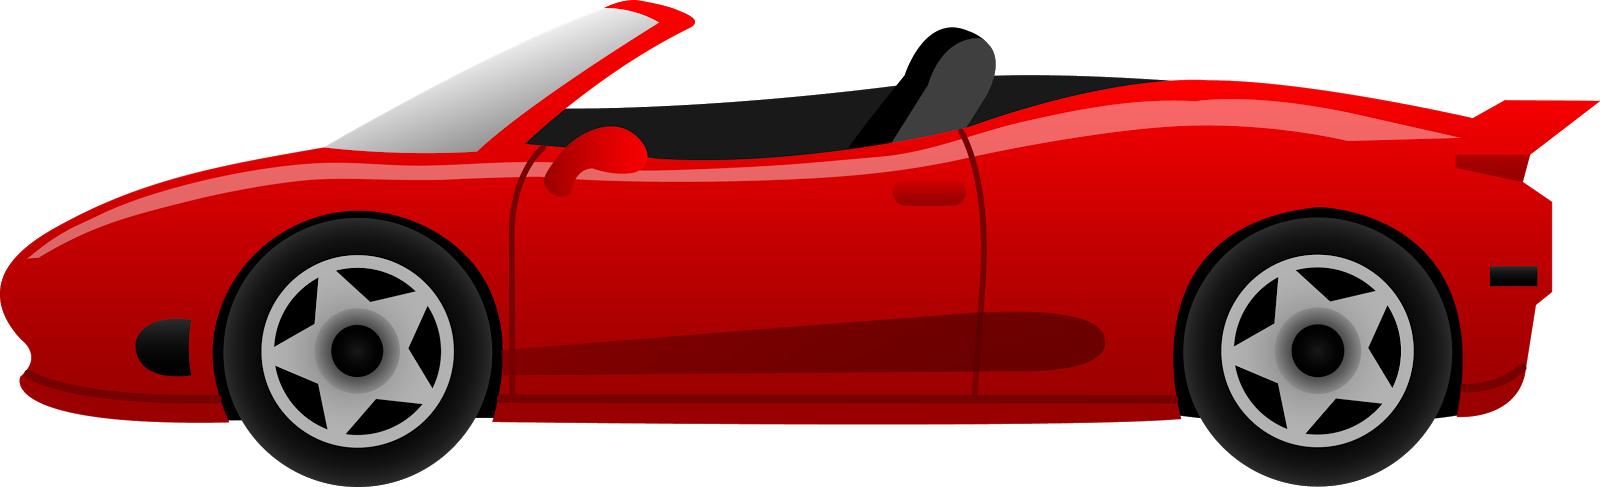 Clipart of car 2